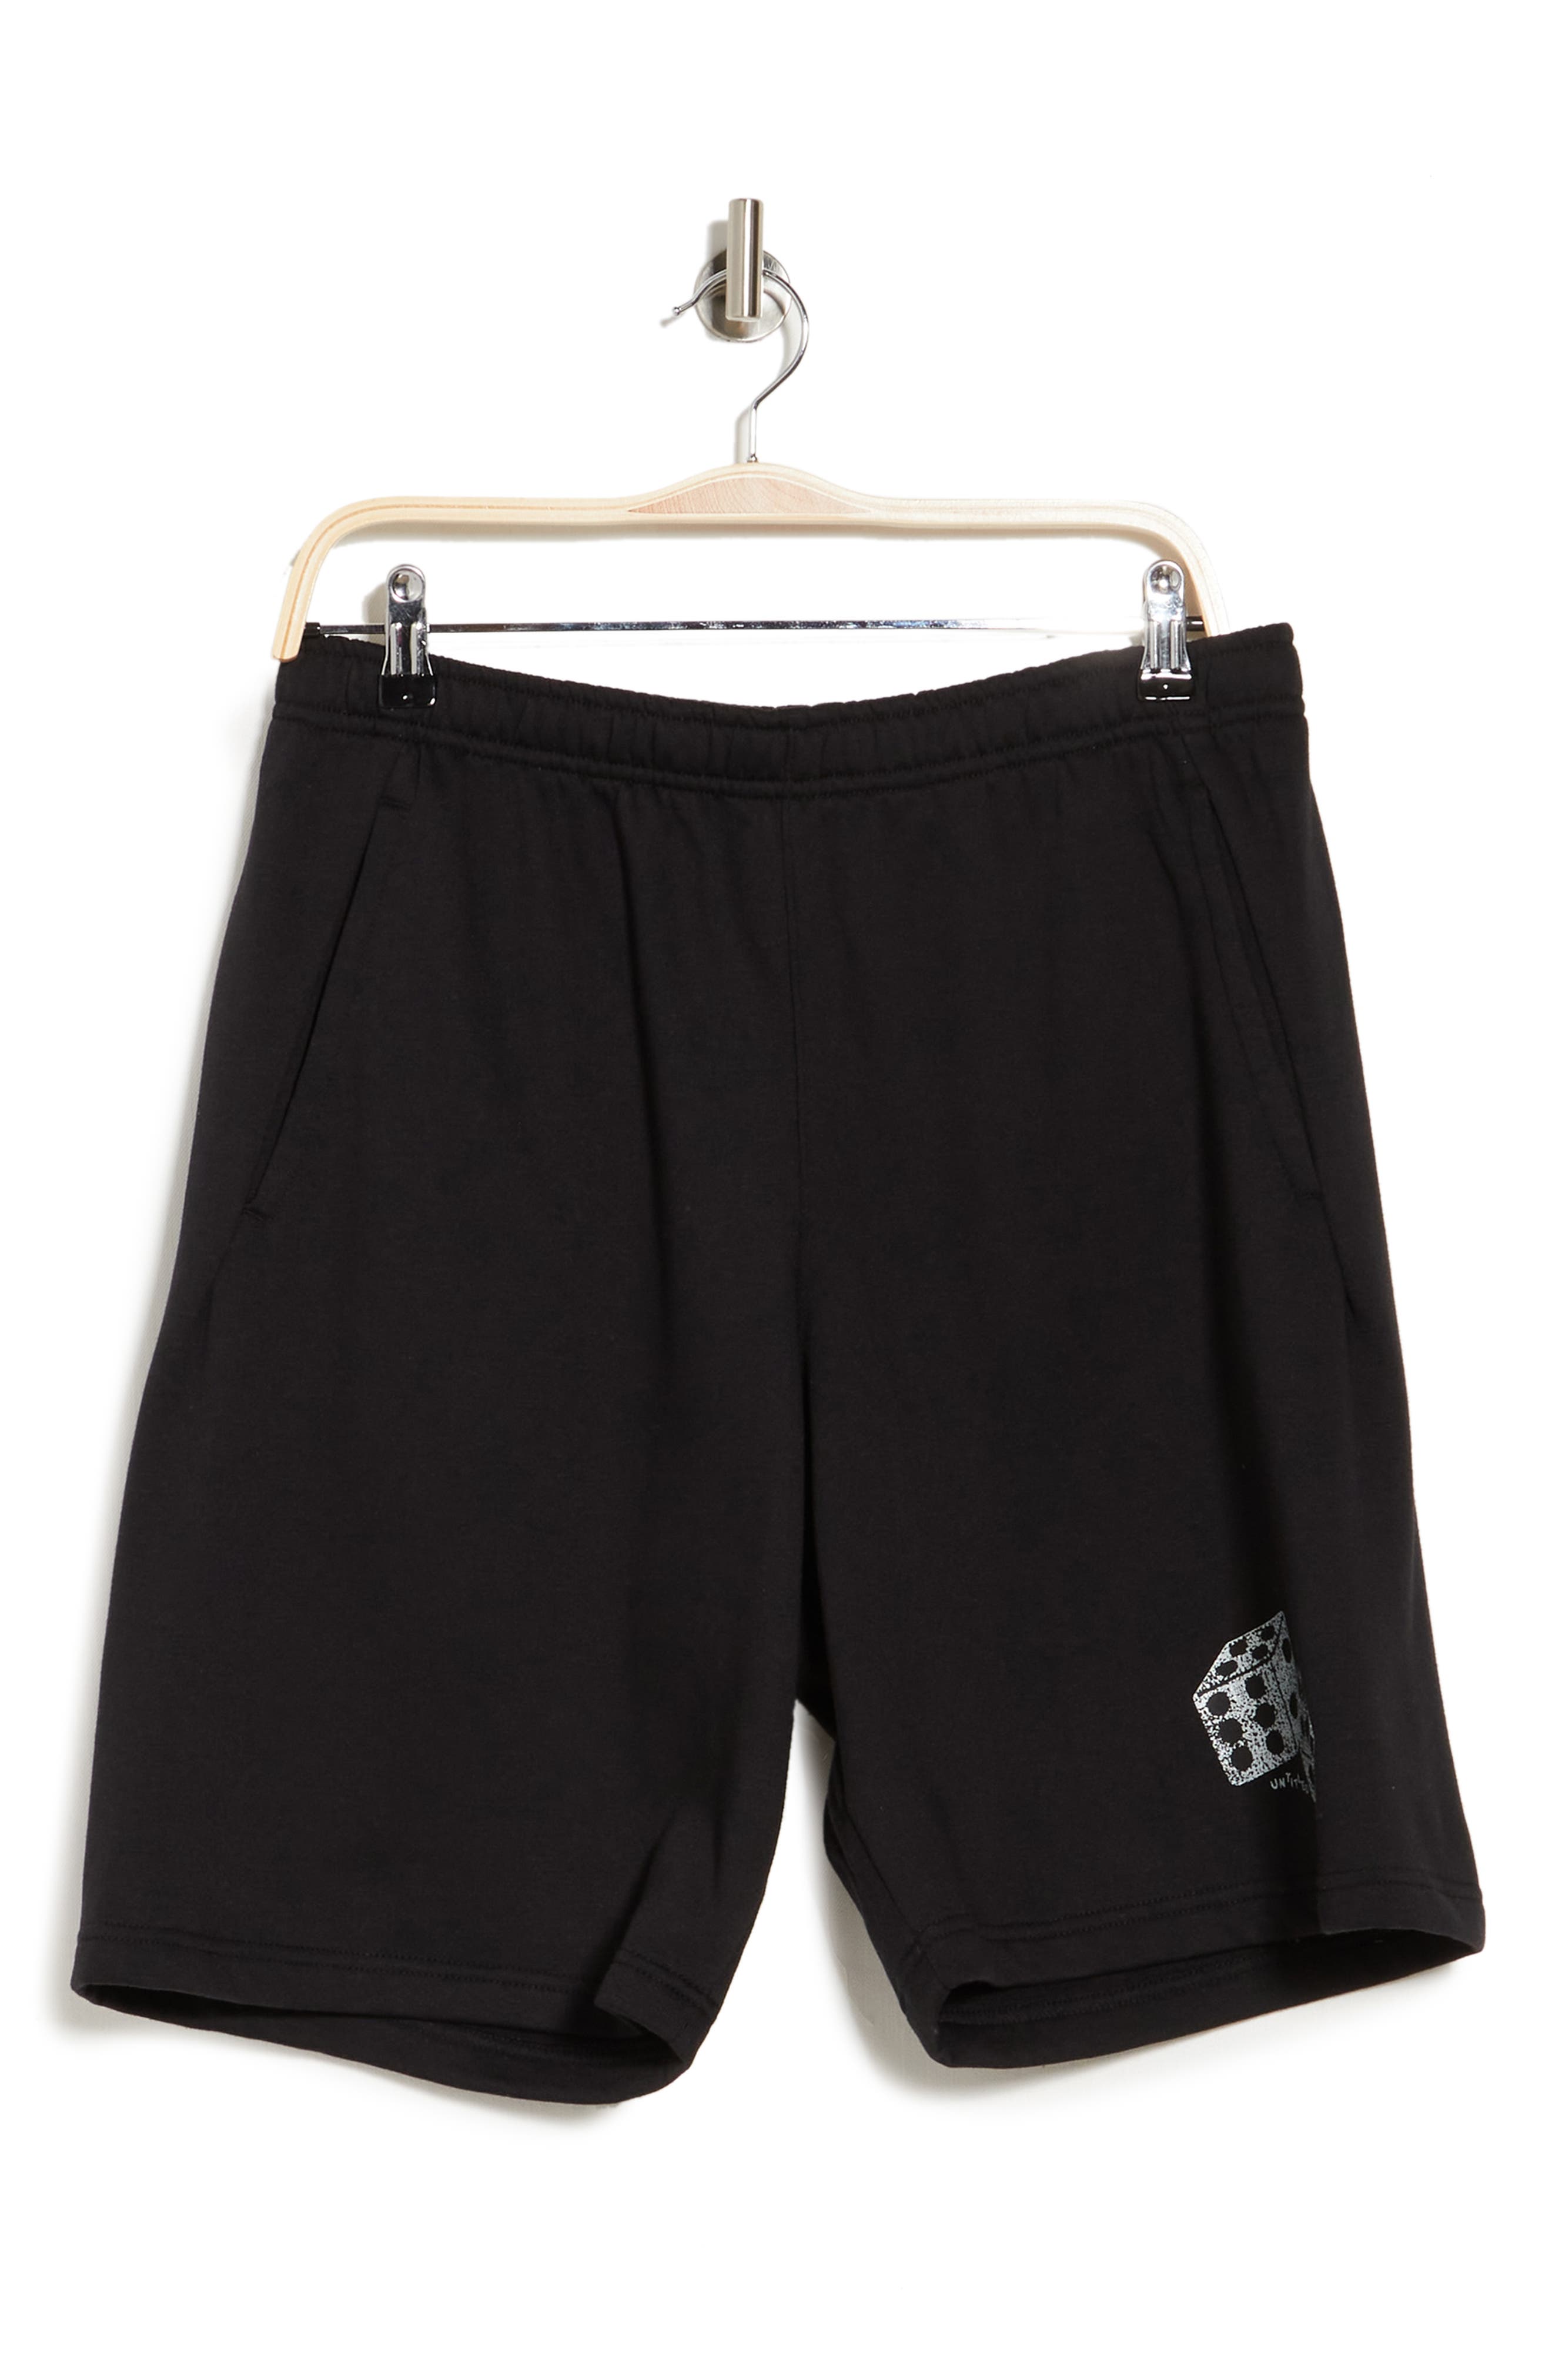 Designs Untitled Dice Graphic Shorts In Black W/silver